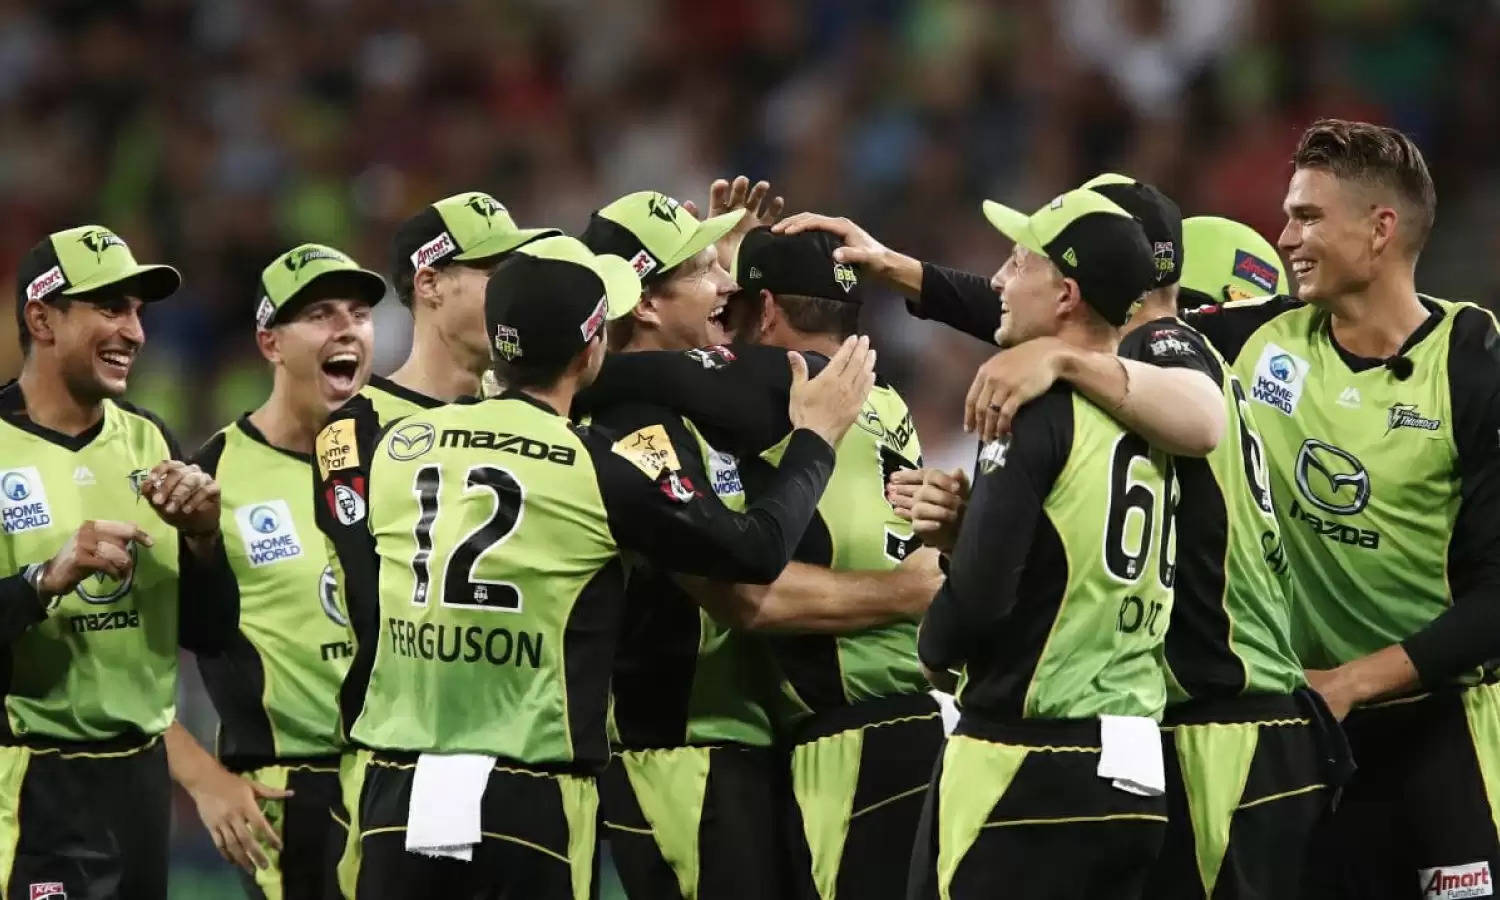 BBL 10: Sydney Thunder Team Preview, Squad And Fantasy Cheat Sheet For Big Bash League 2020-21 Season